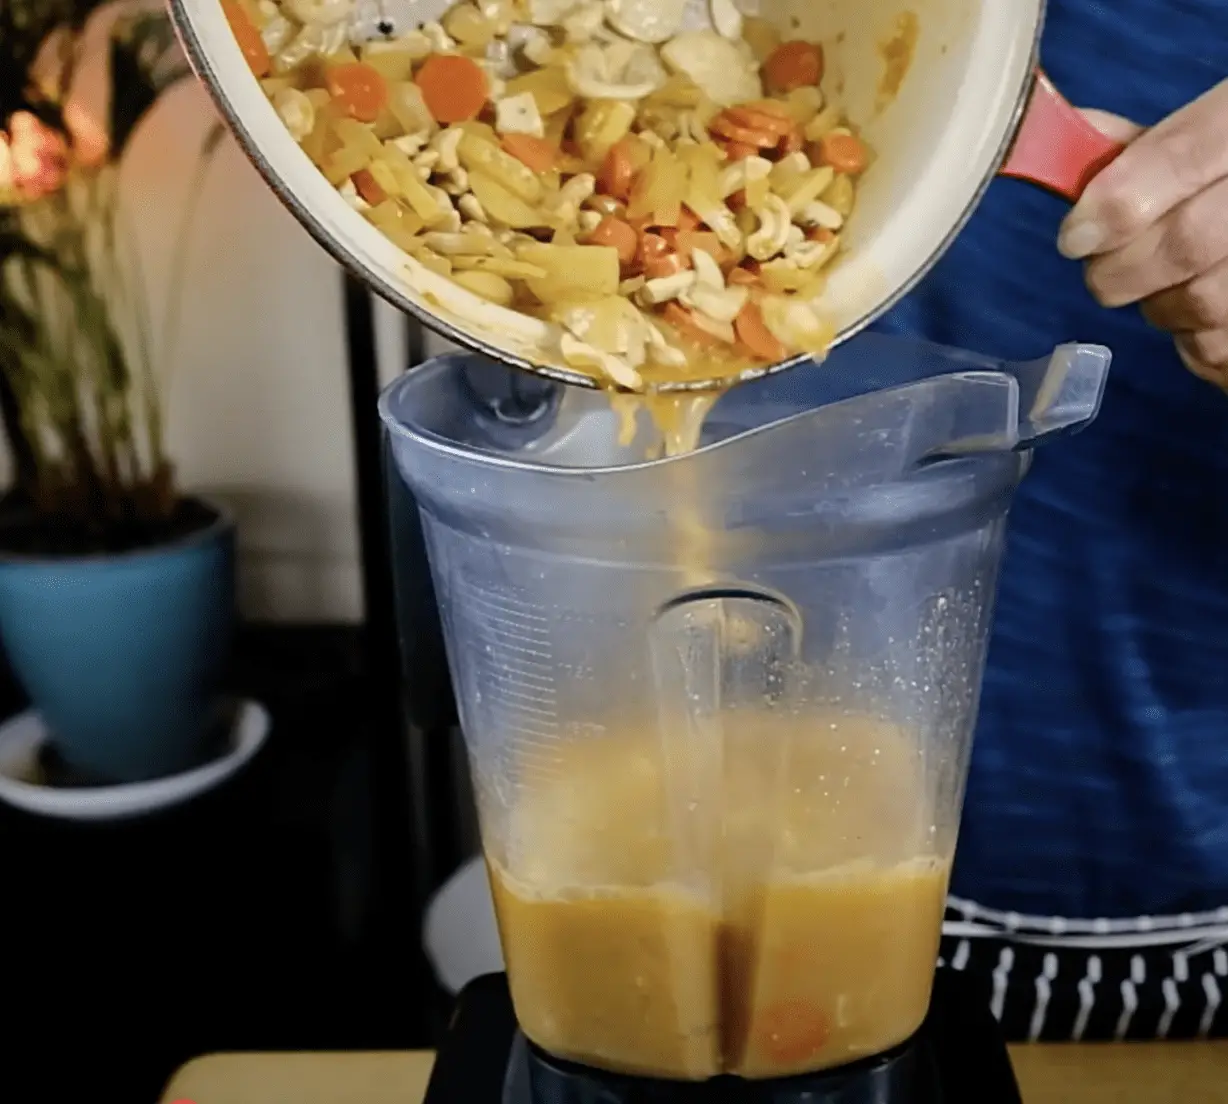 Blending mac and cheese sauce